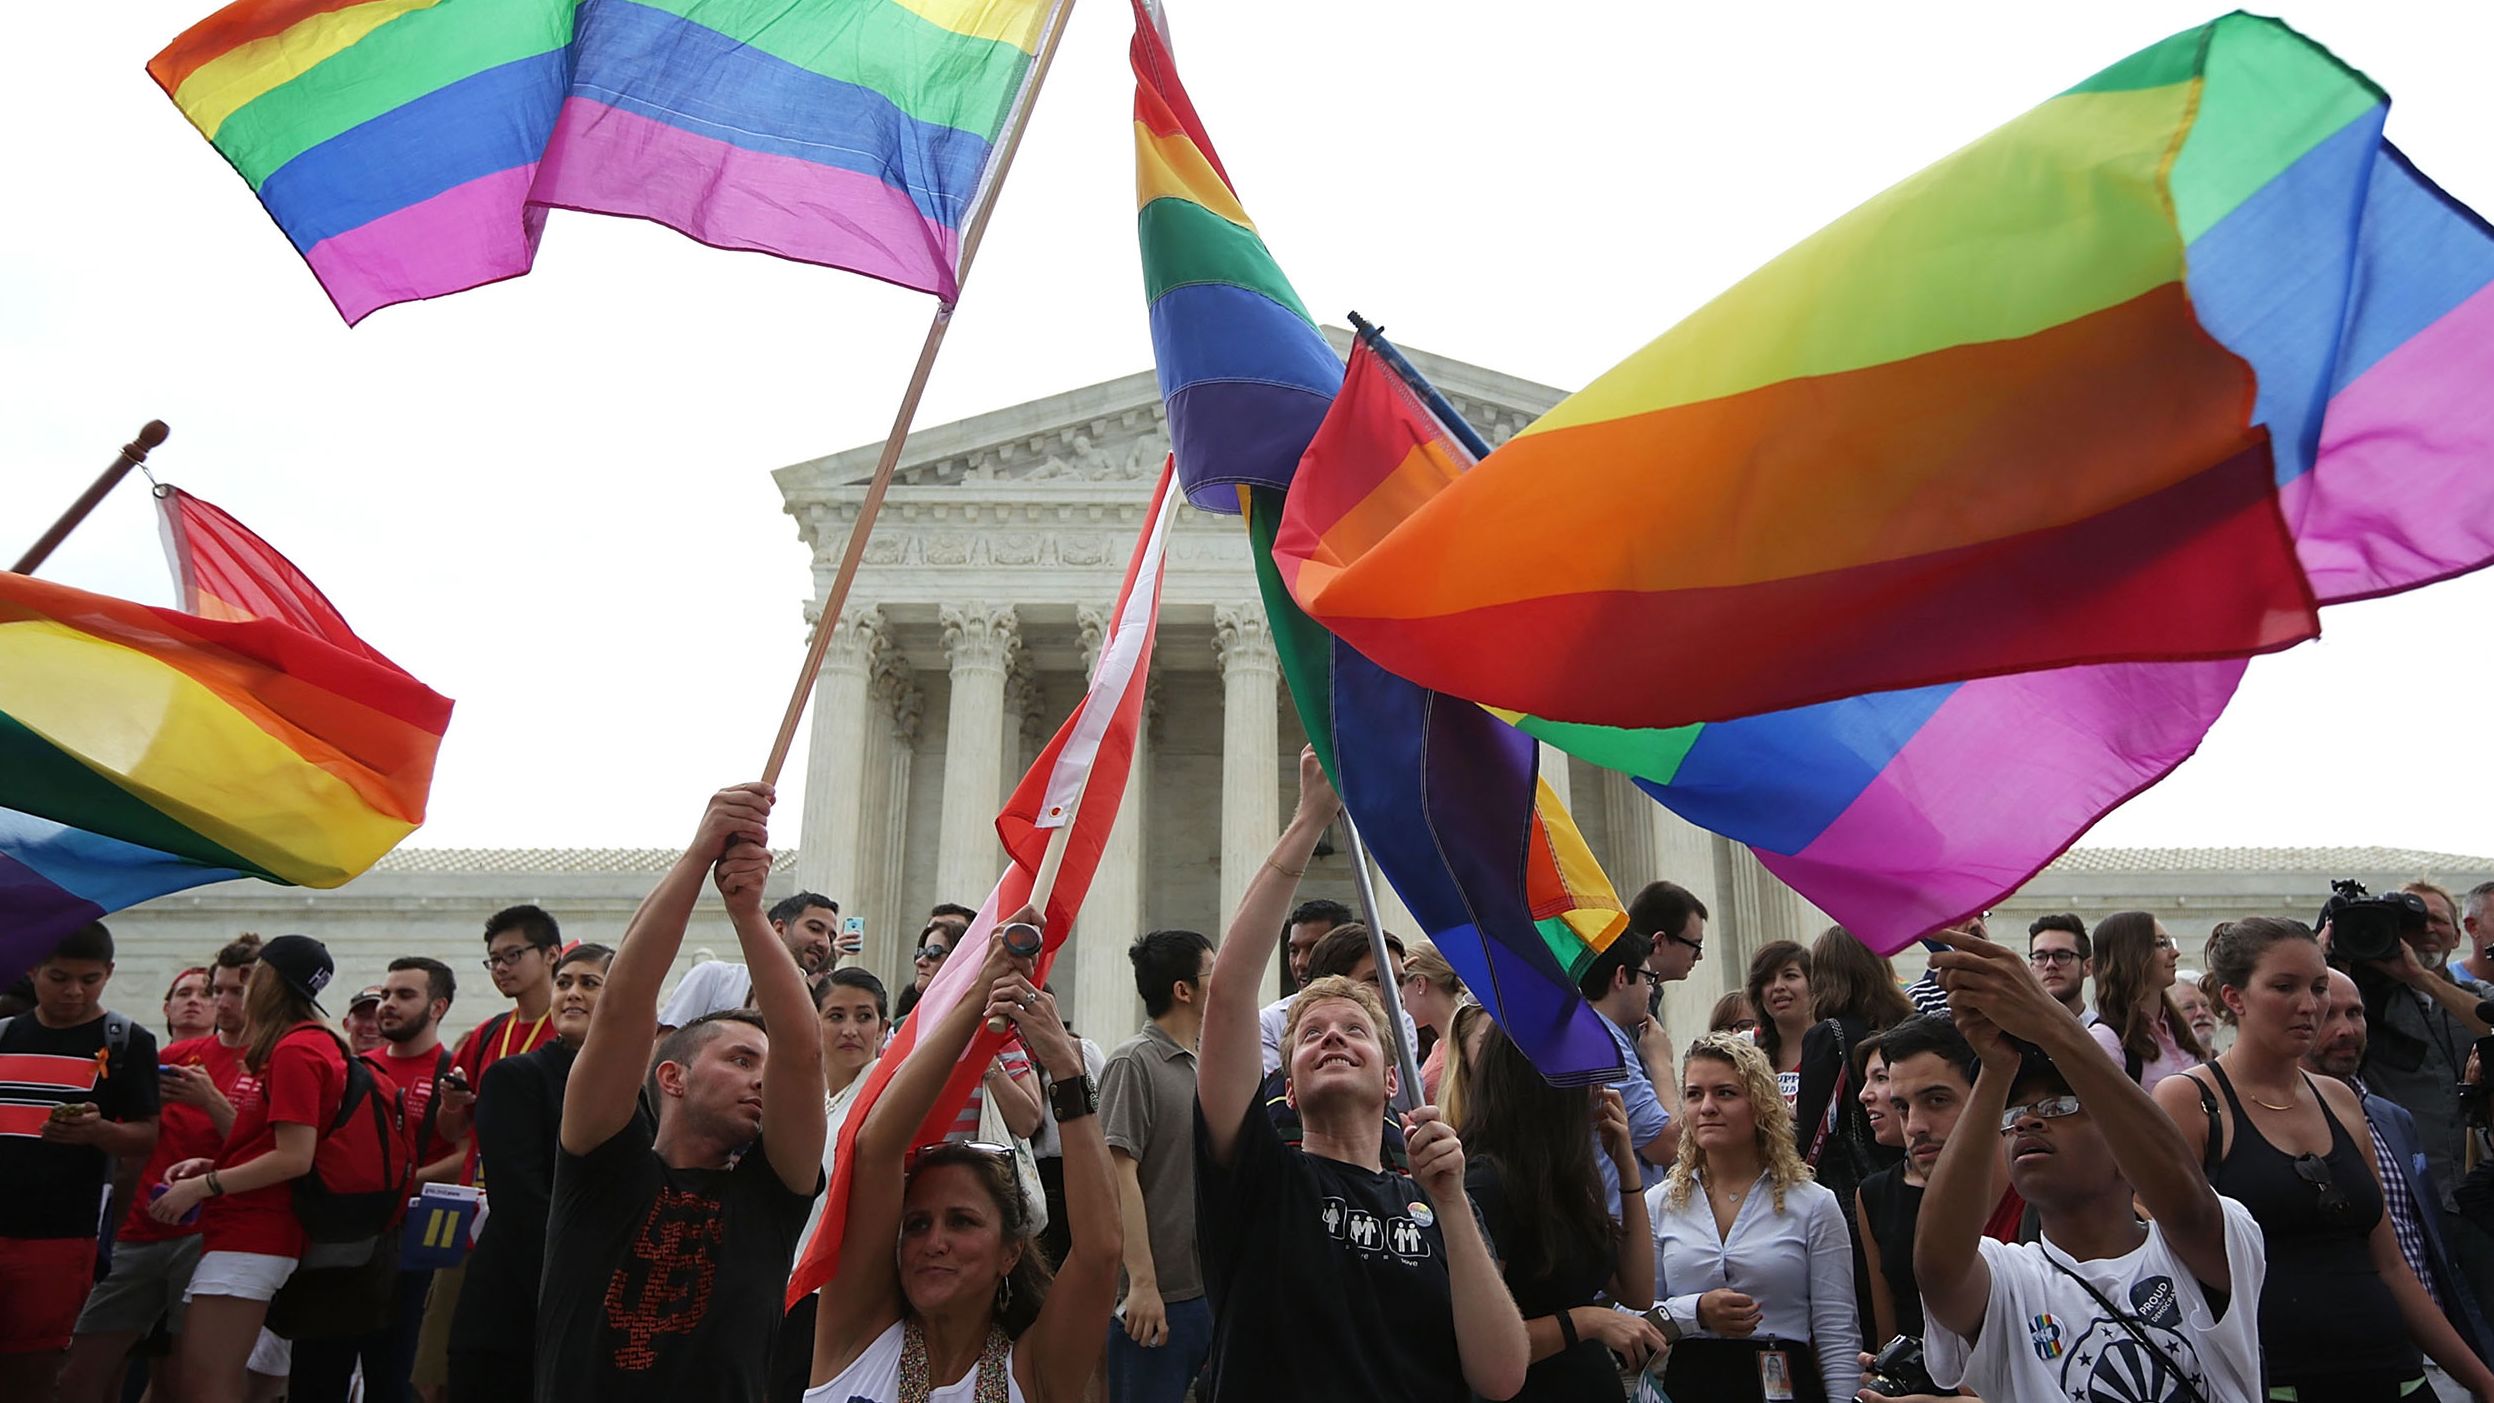 Supporters of same-sex marriage rejoice outside the Supreme Court in Washington, DC. after the U.S Supreme Court hands down a ruling regarding same-sex marriage, June 26, 2015. The high court ruled that same-sex couples have the right to marry in all 50 states.  (Photo by Alex Wong/Getty Images)